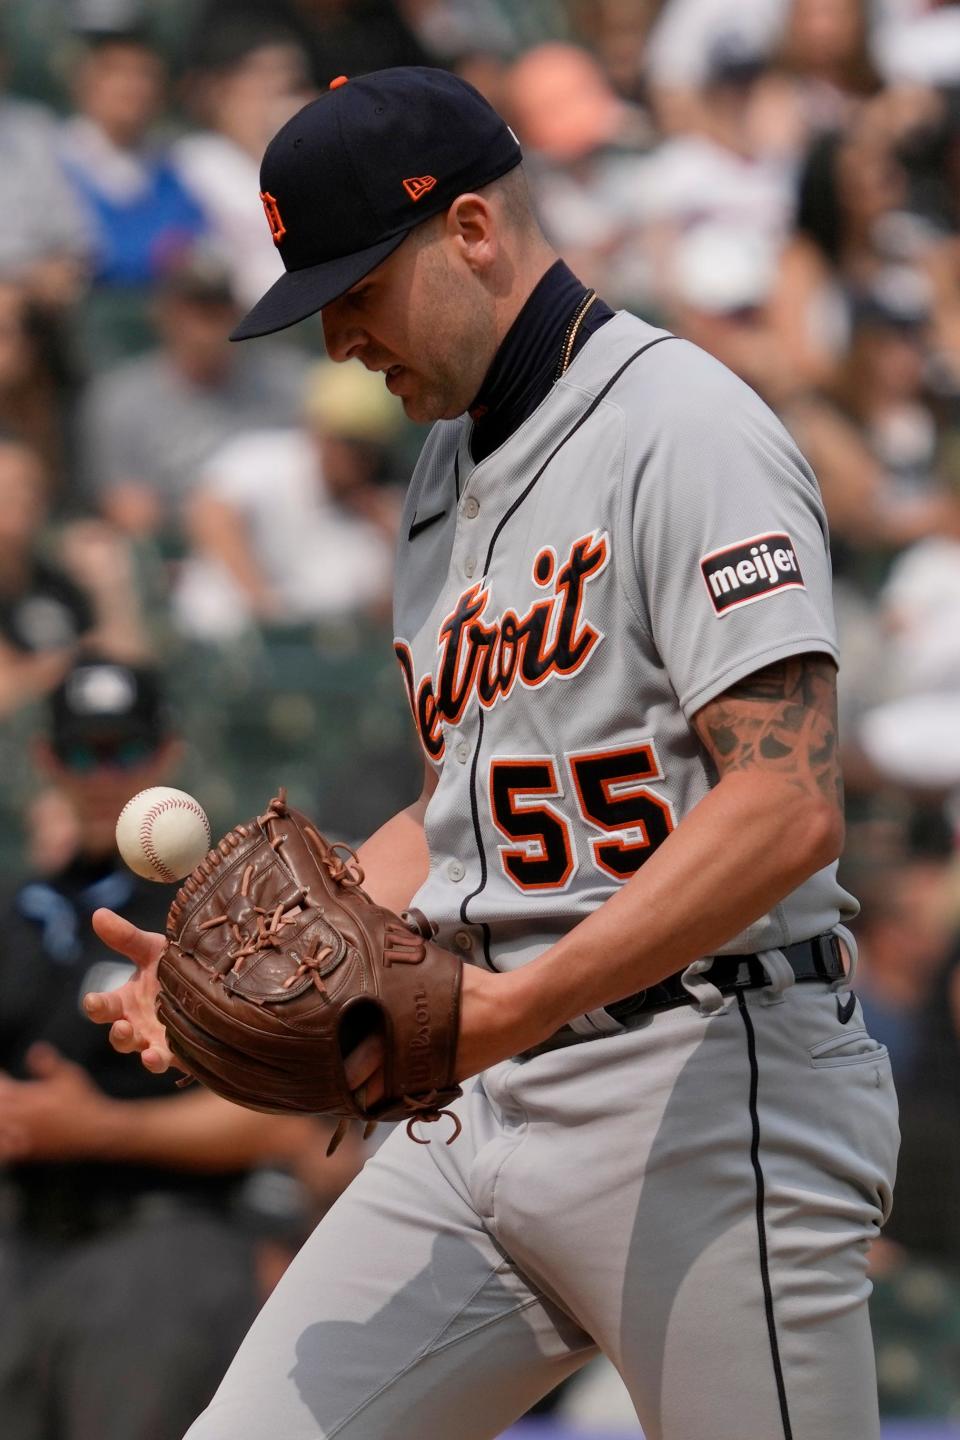 Detroit Tigers relief pitcher Alex Lange tosses a ball during the ninth inning of a baseball game against the Chicago White Sox at Guaranteed Rate Field in Chicago on Sunday, June 4, 2023.